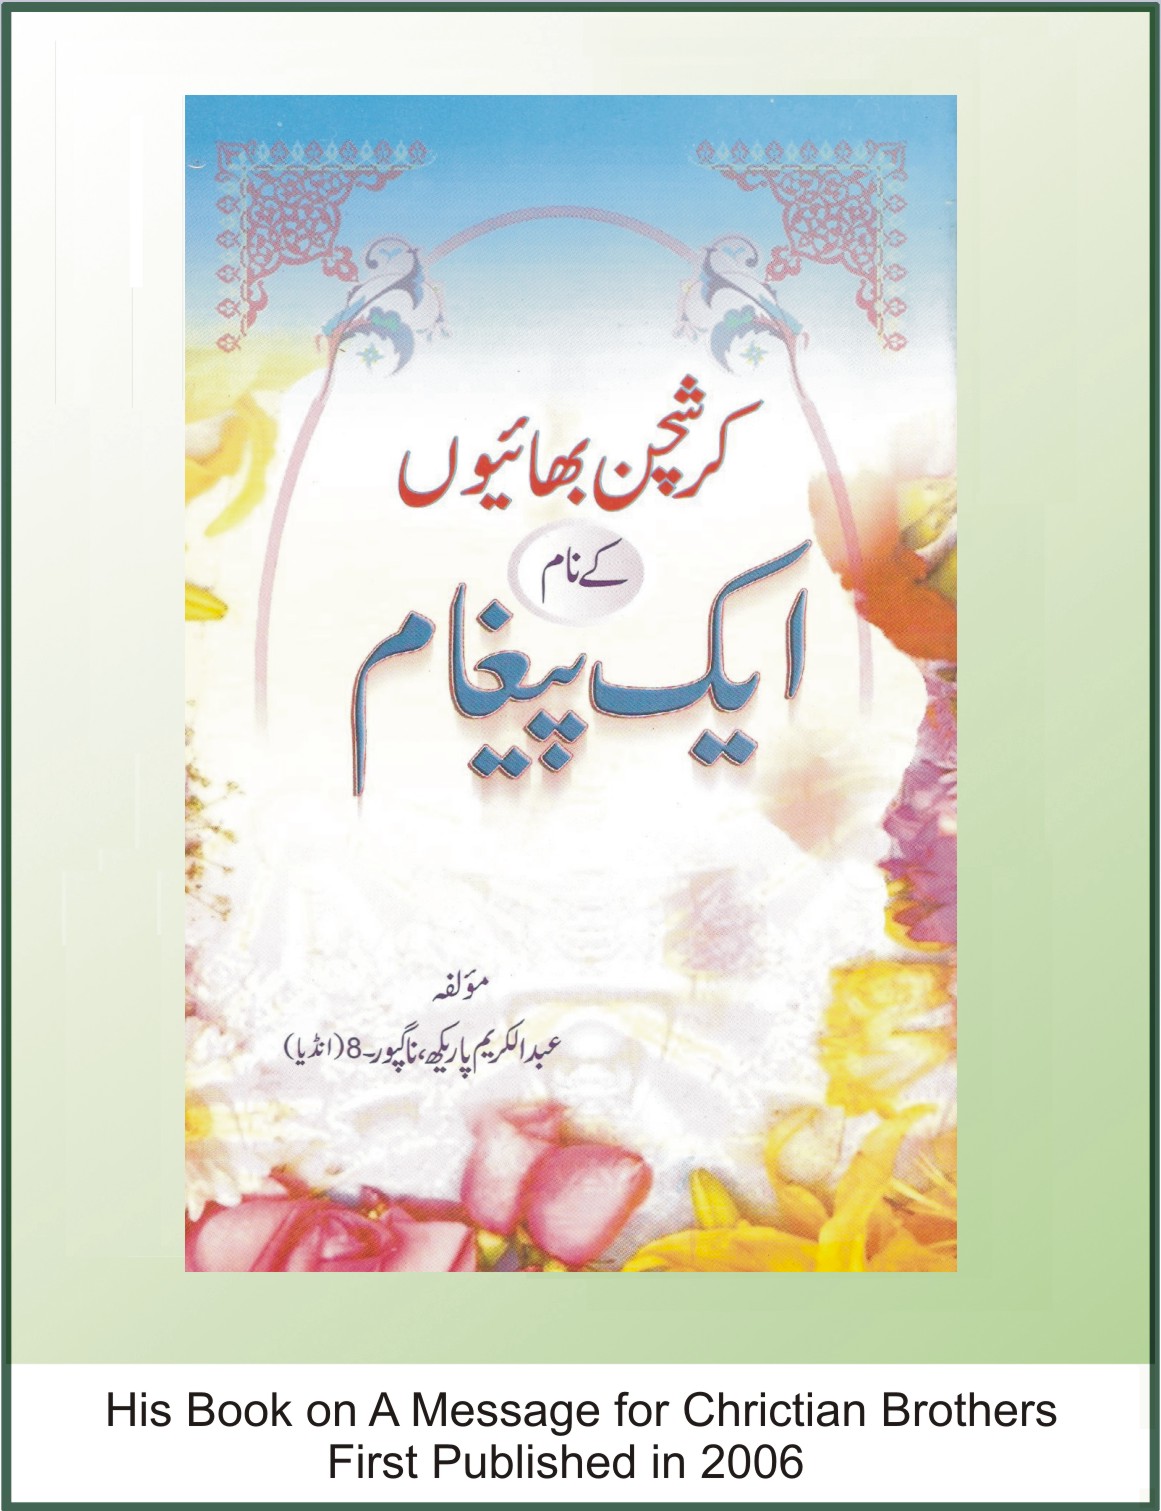 A Message for Christian Brothers (Urdu) First Published in 2006